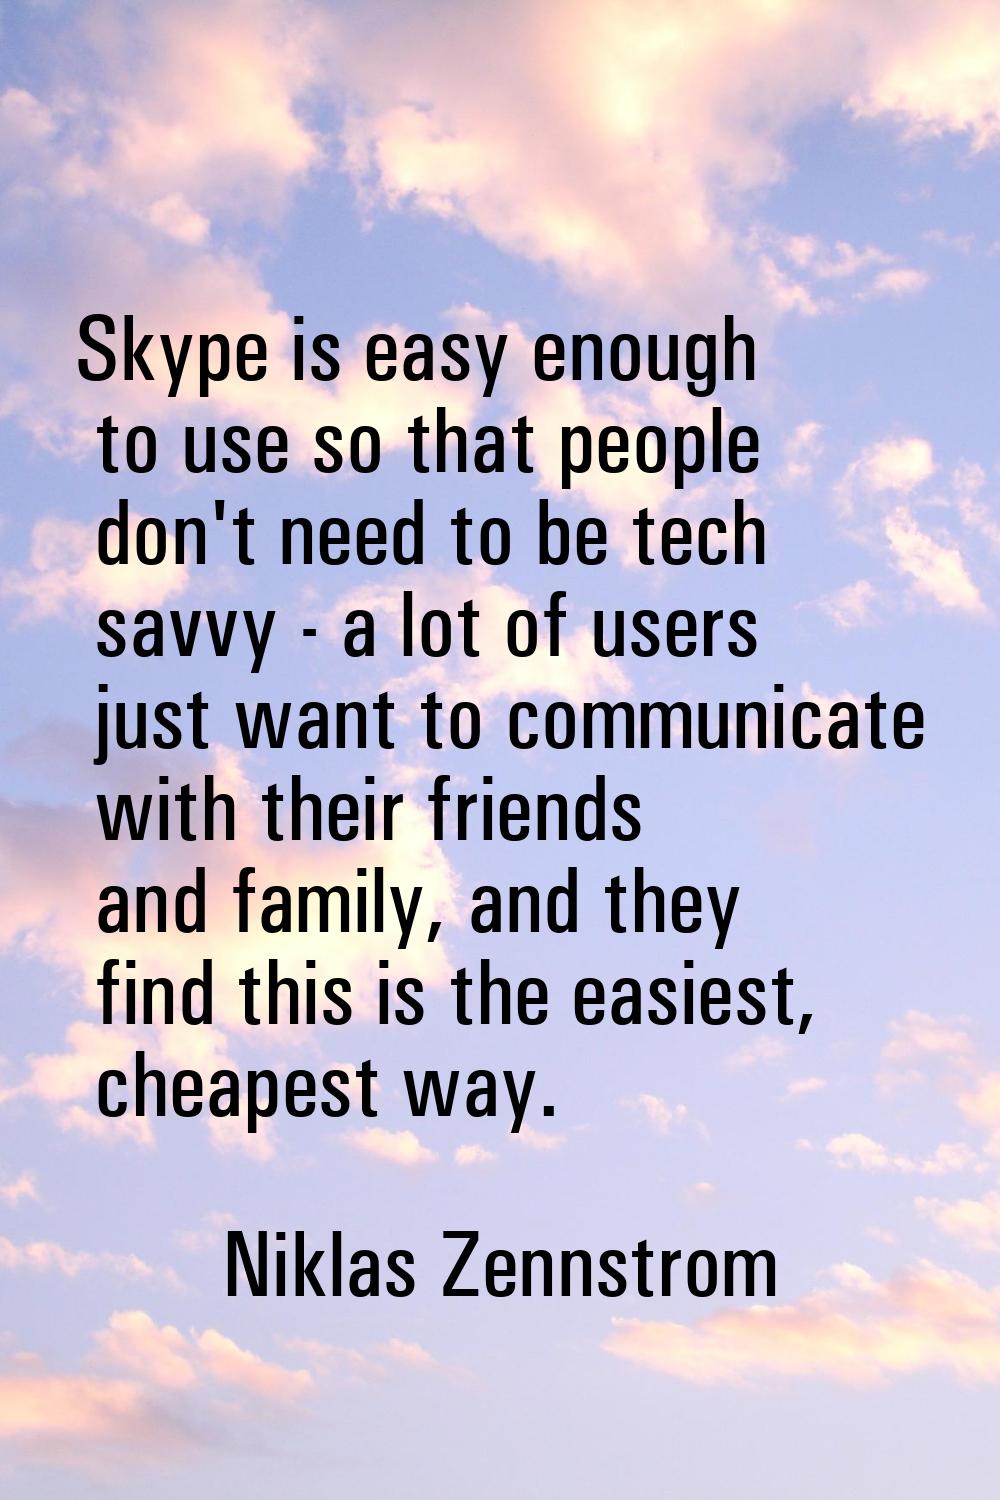 Skype is easy enough to use so that people don't need to be tech savvy - a lot of users just want t